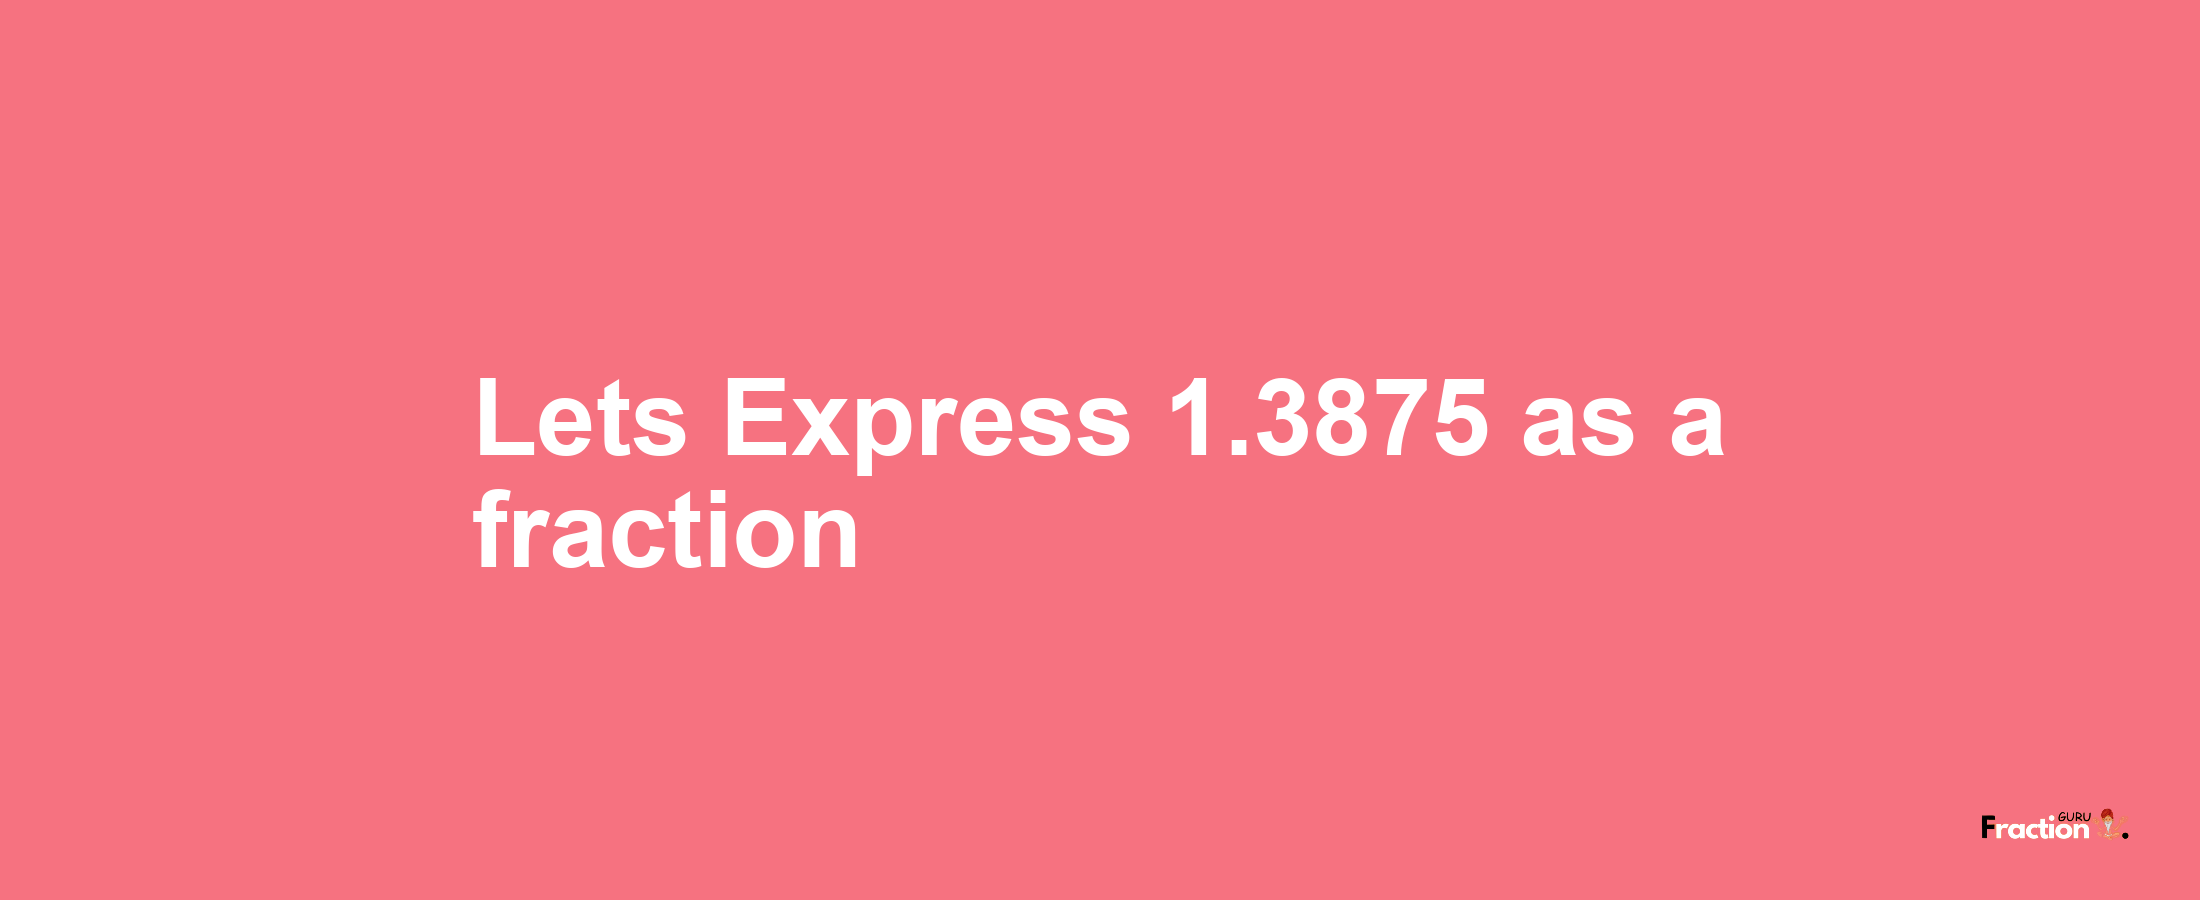 Lets Express 1.3875 as afraction